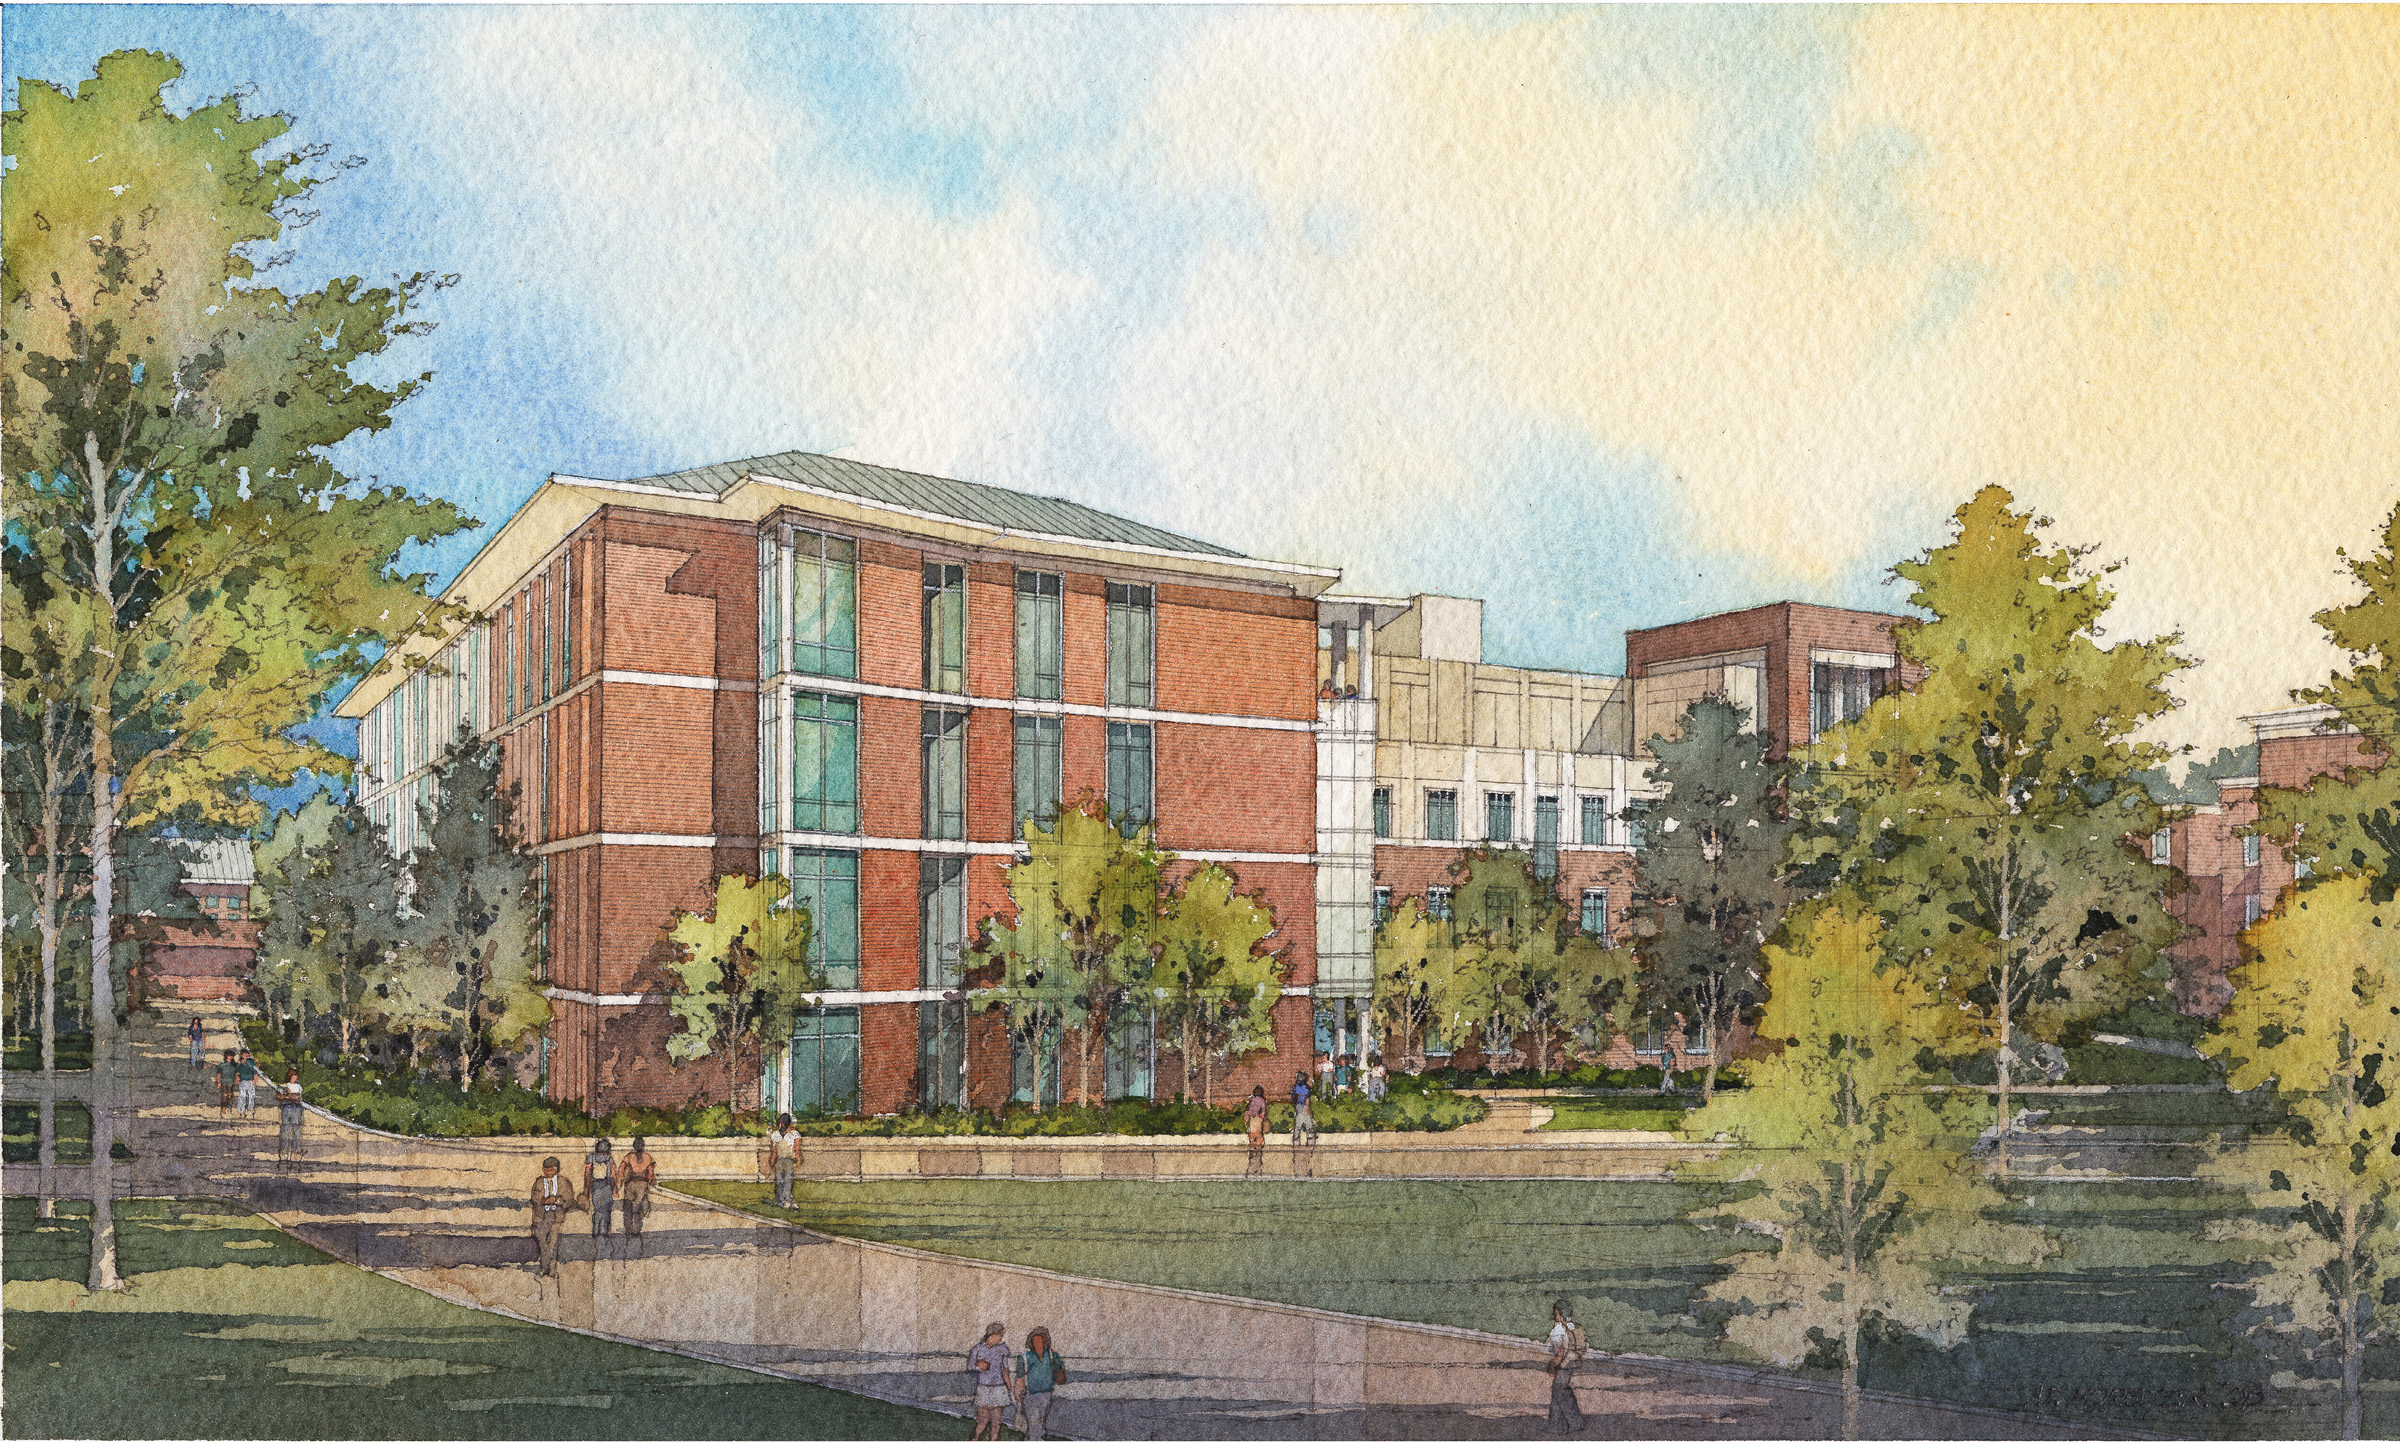 Digital Rendering of the multistory Physical and Life Sciences Building at UVA